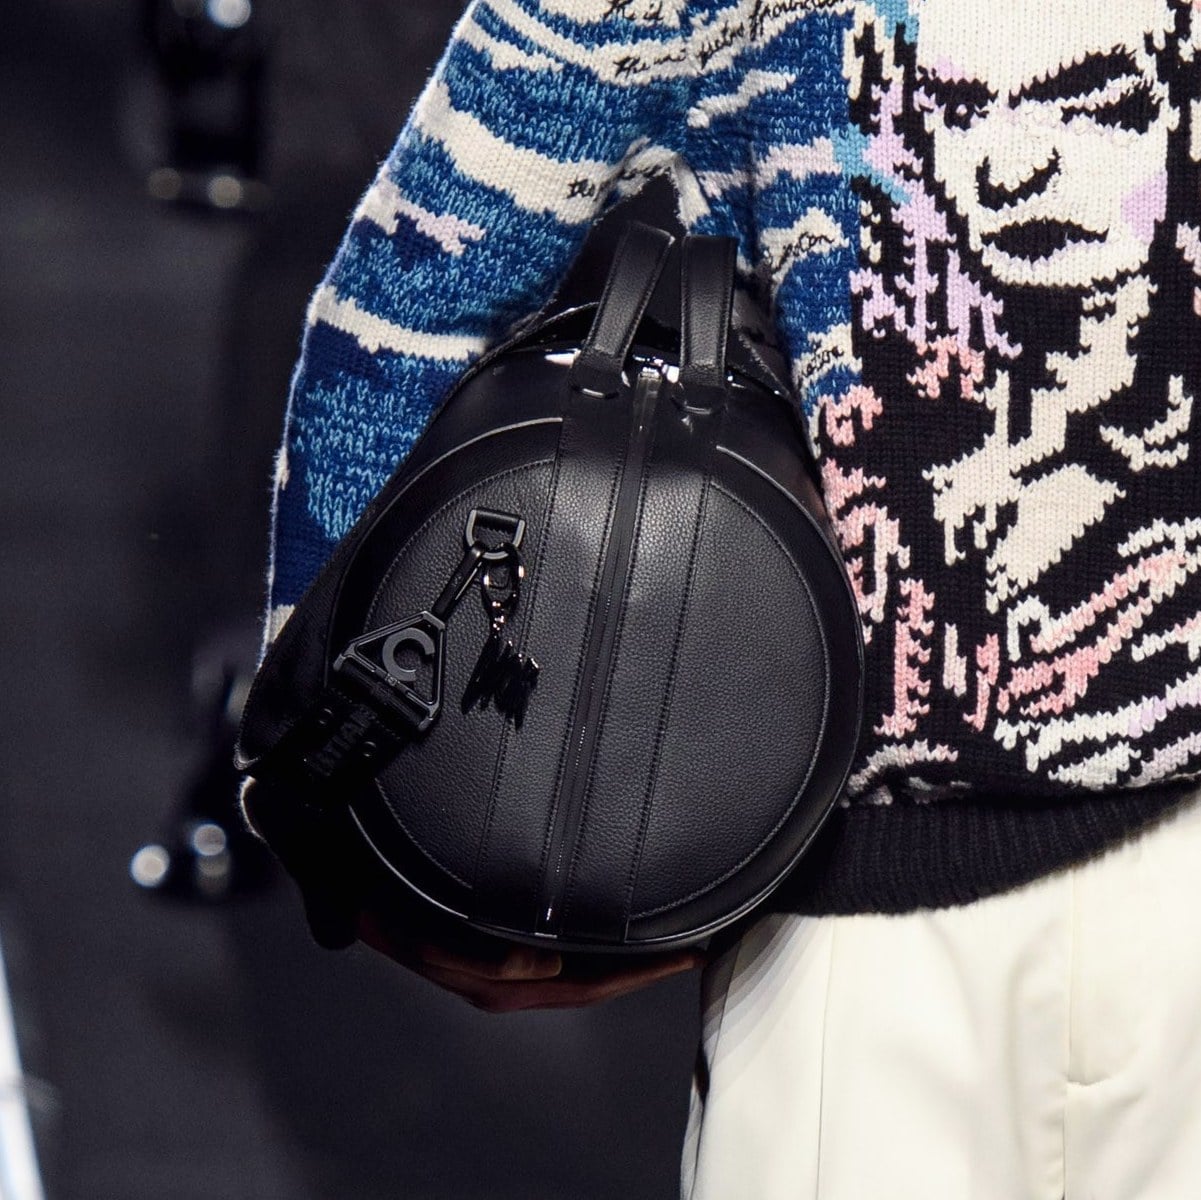 Dior Men's Spring/Summer 2019 Runway Bag Collection - Spotted Fashion